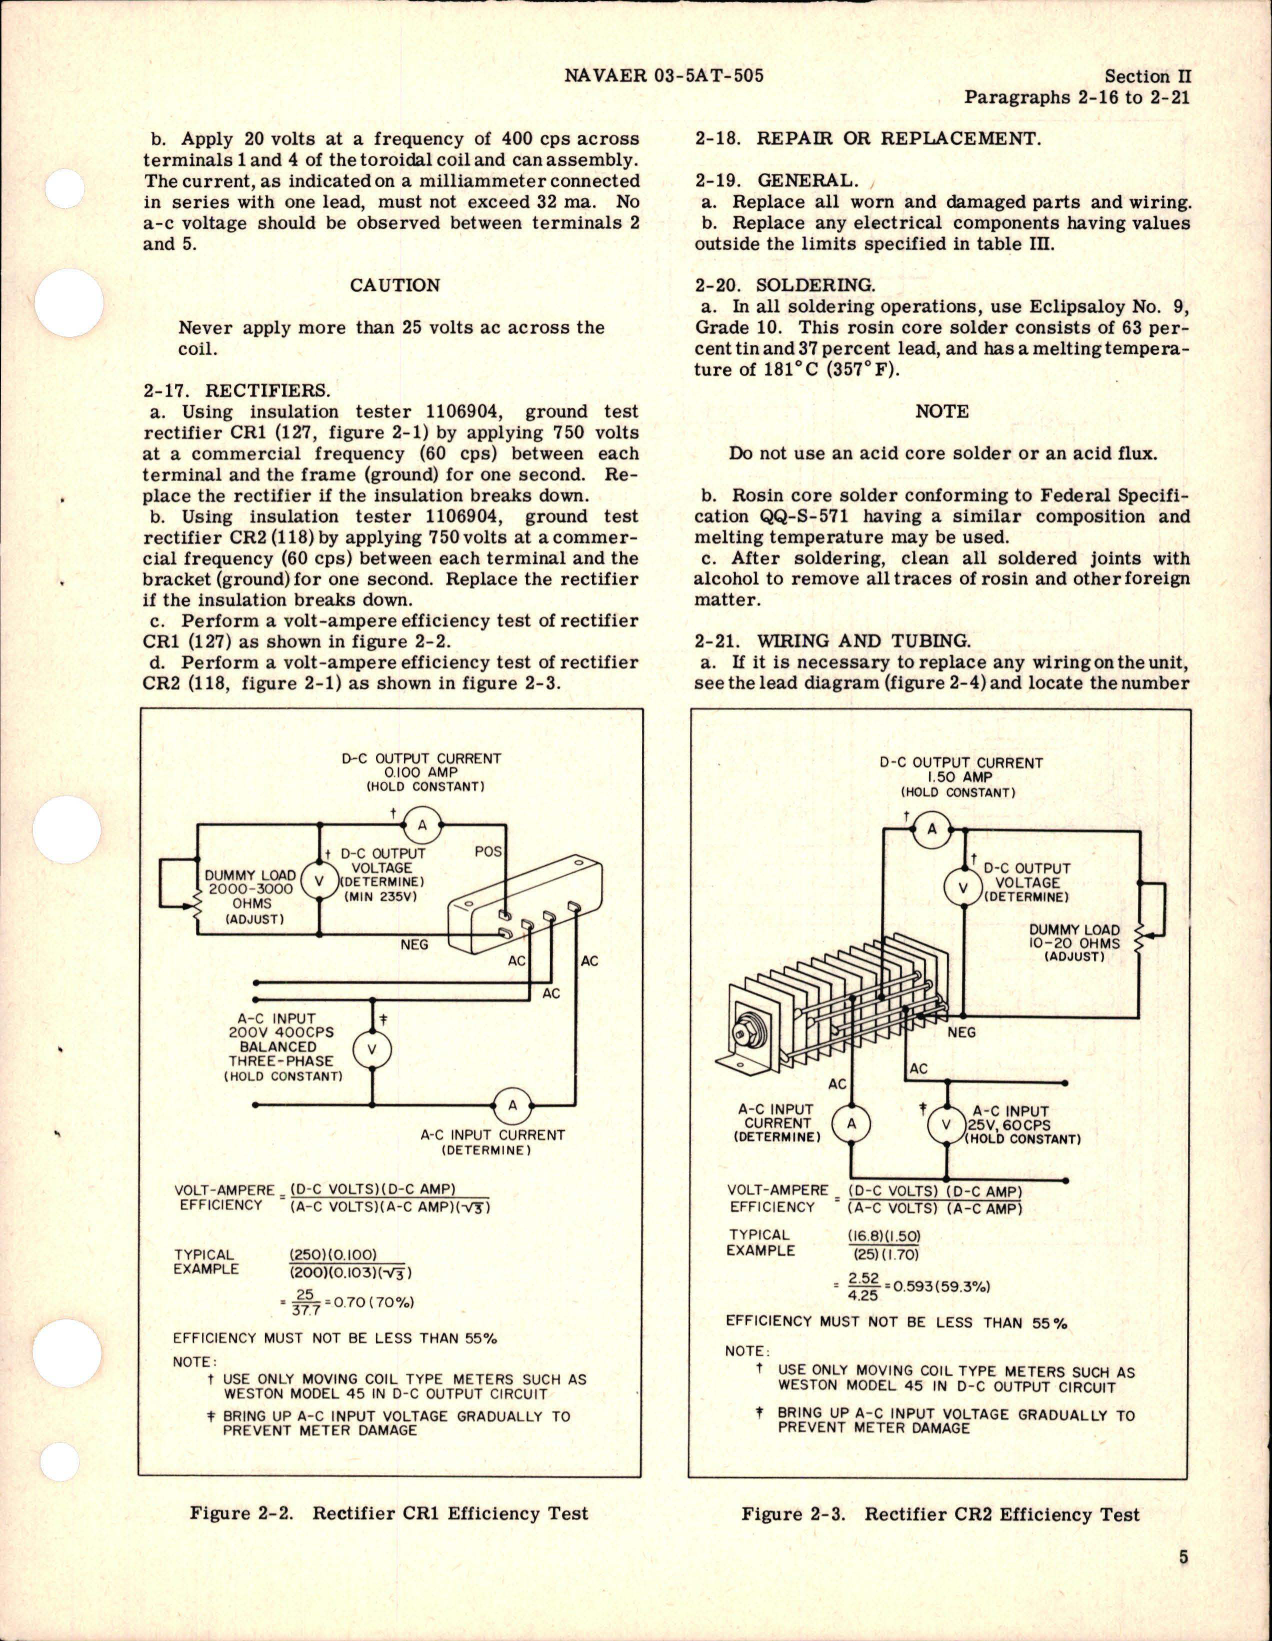 Sample page 9 from AirCorps Library document: Overhaul Instructions for Voltage Regulators 